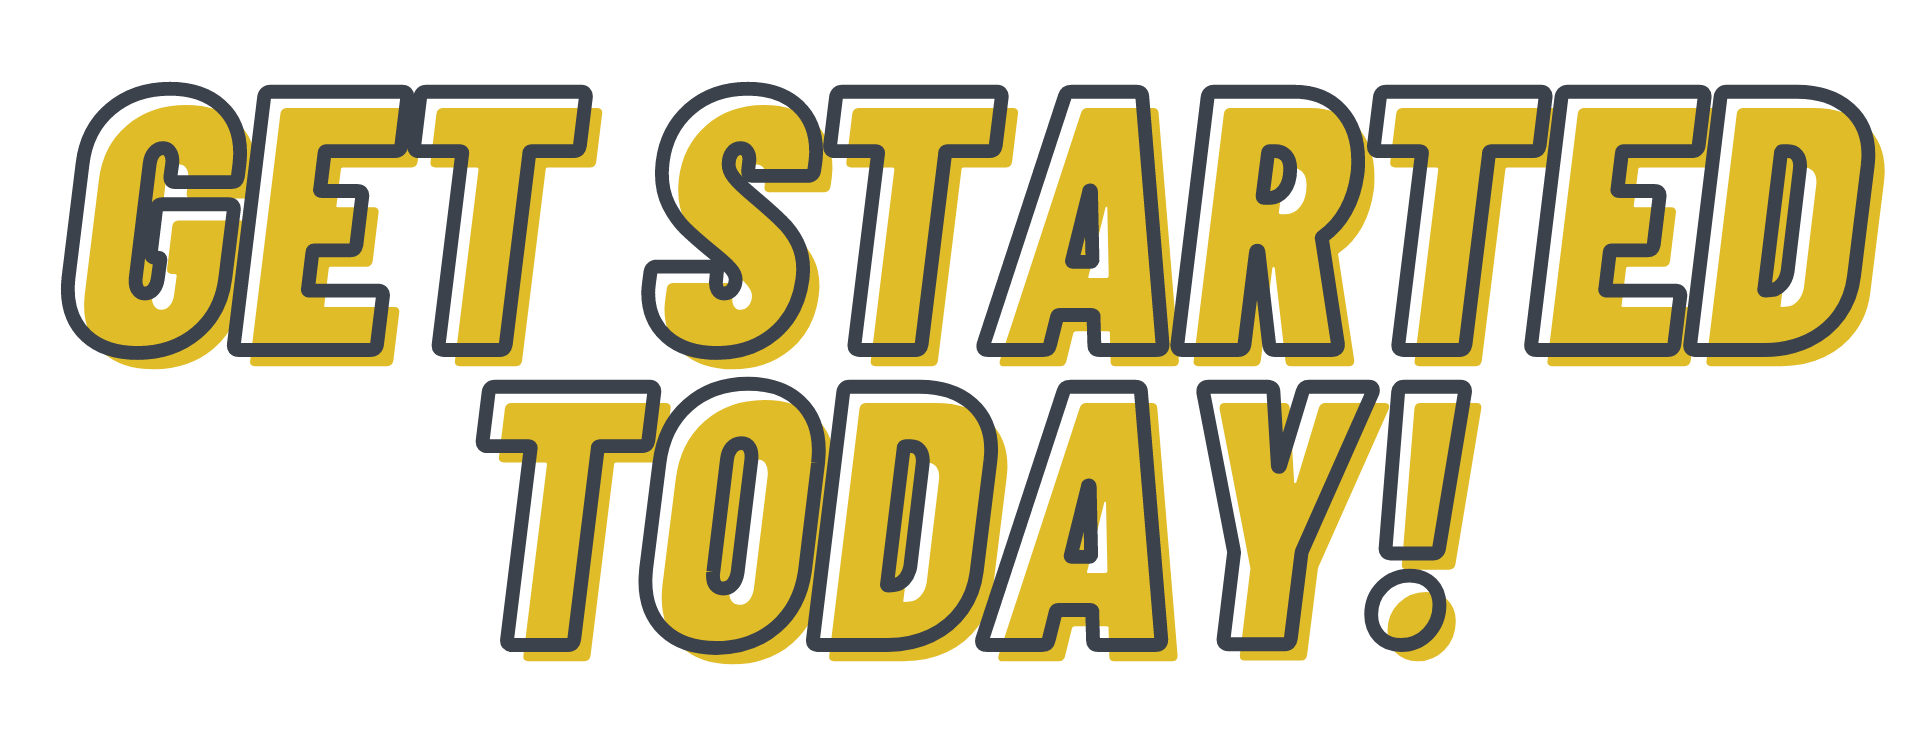 Get started today!